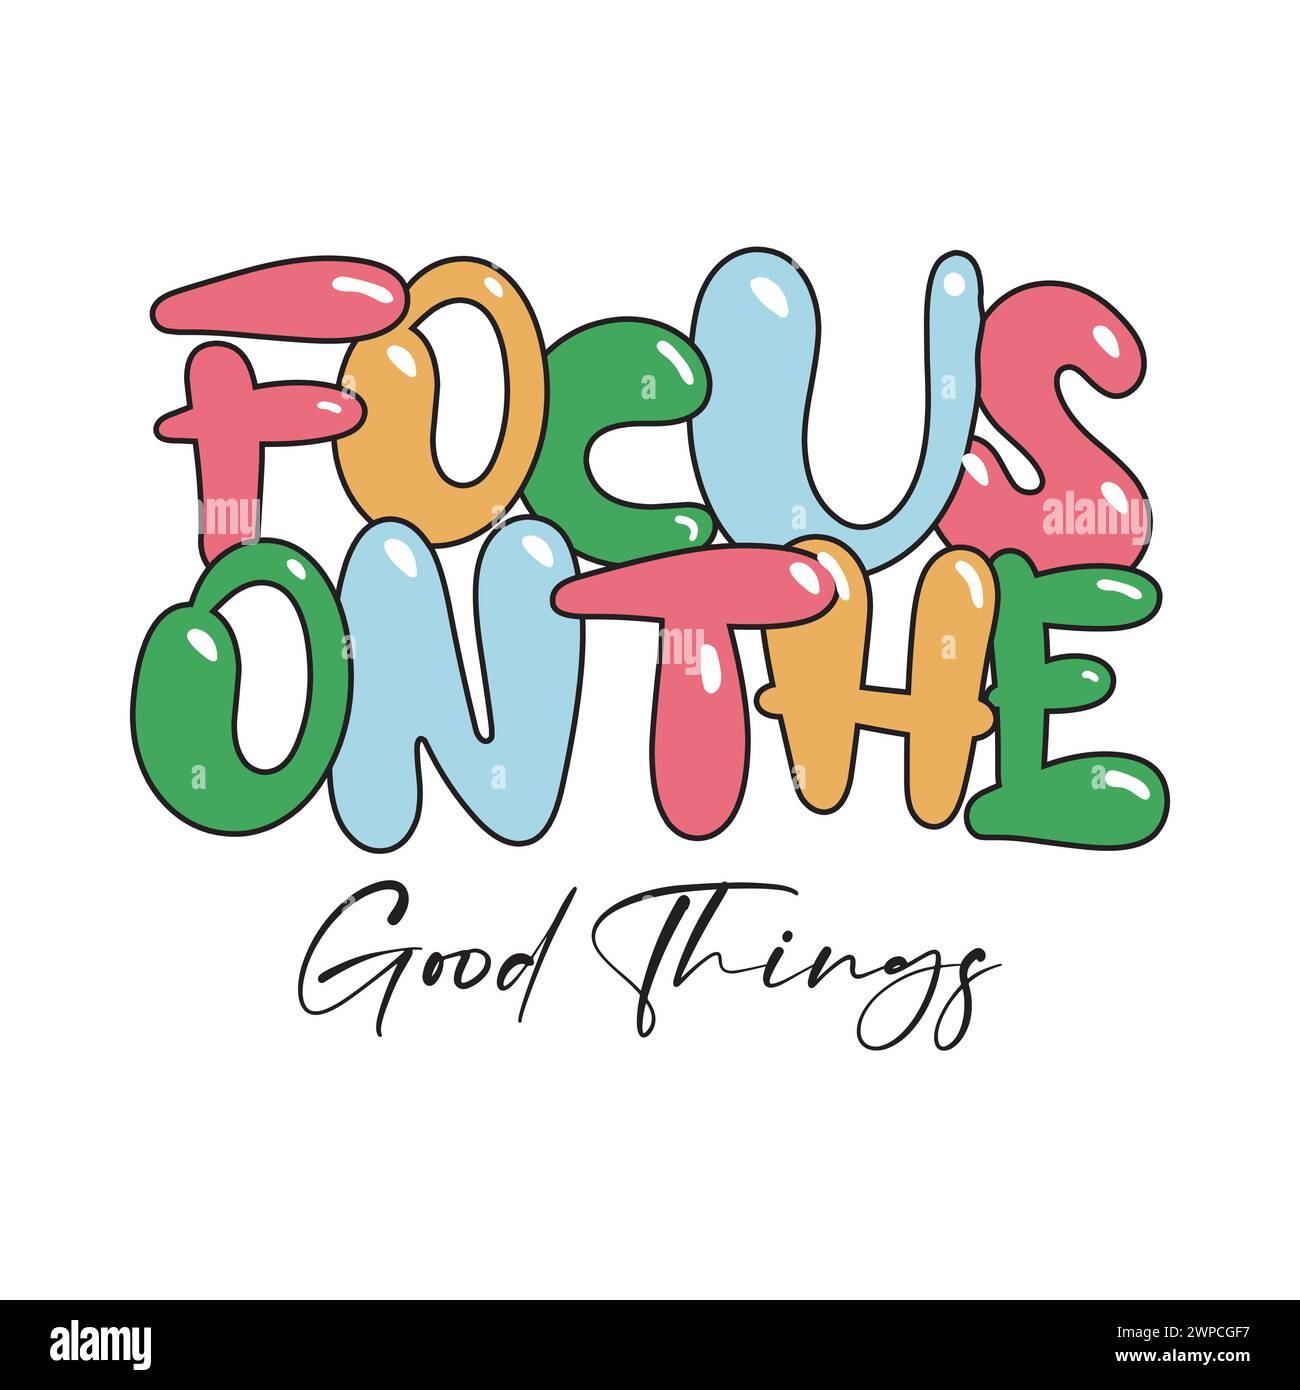 Focus on the good things typography slogan Design Vector for t shirt print. Stock Vector